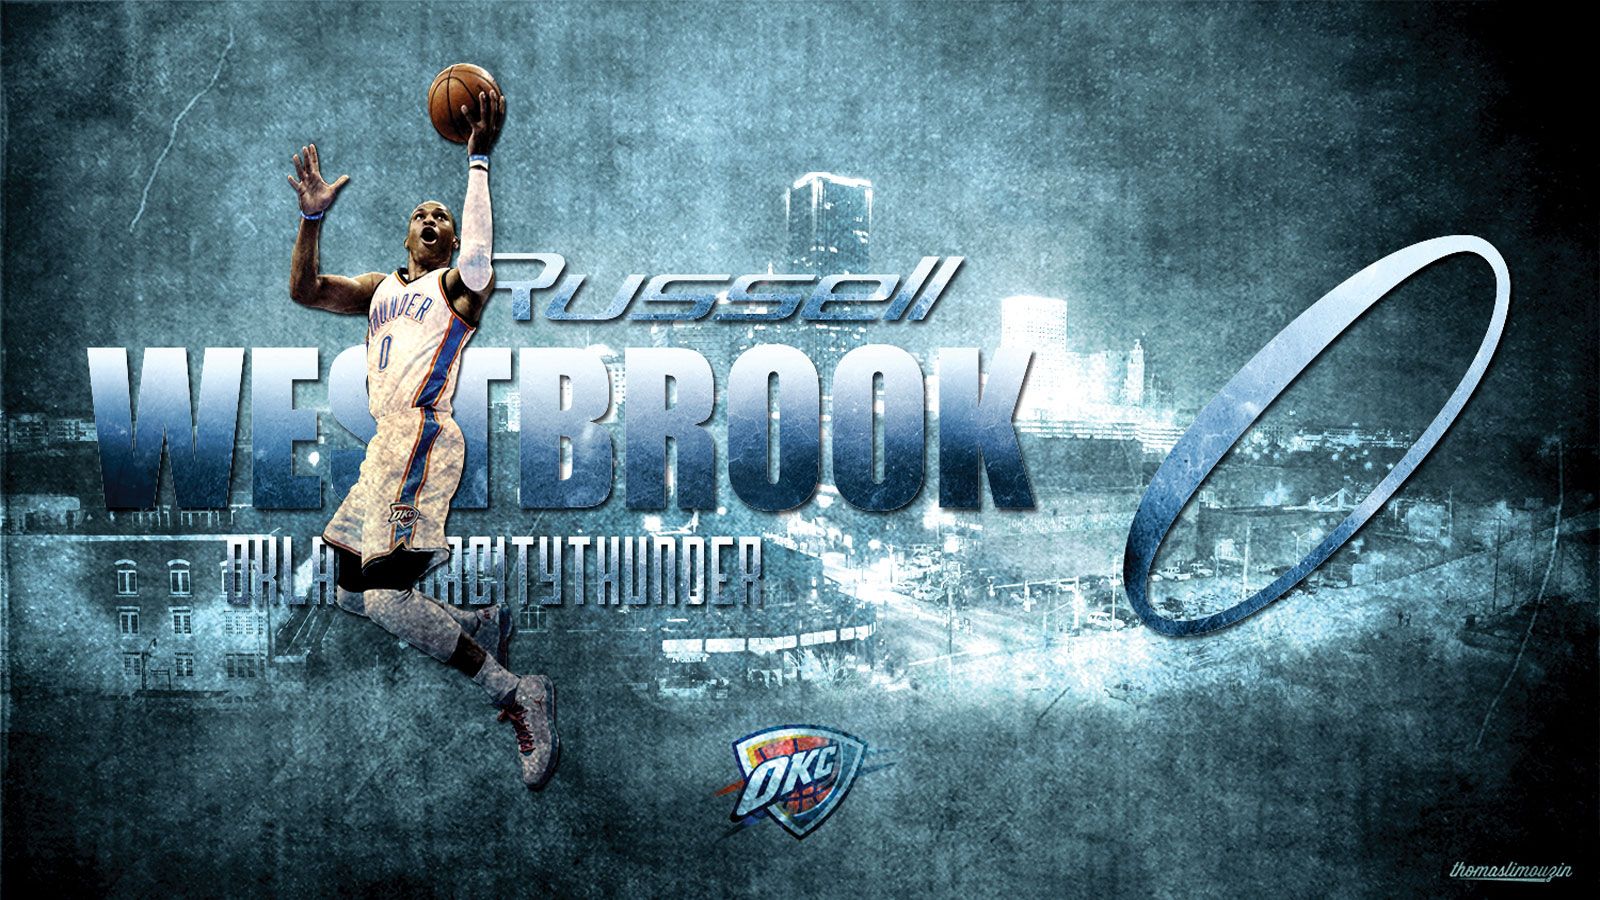 Russell Westbrook Wallpapers Basketball Wallpapers at